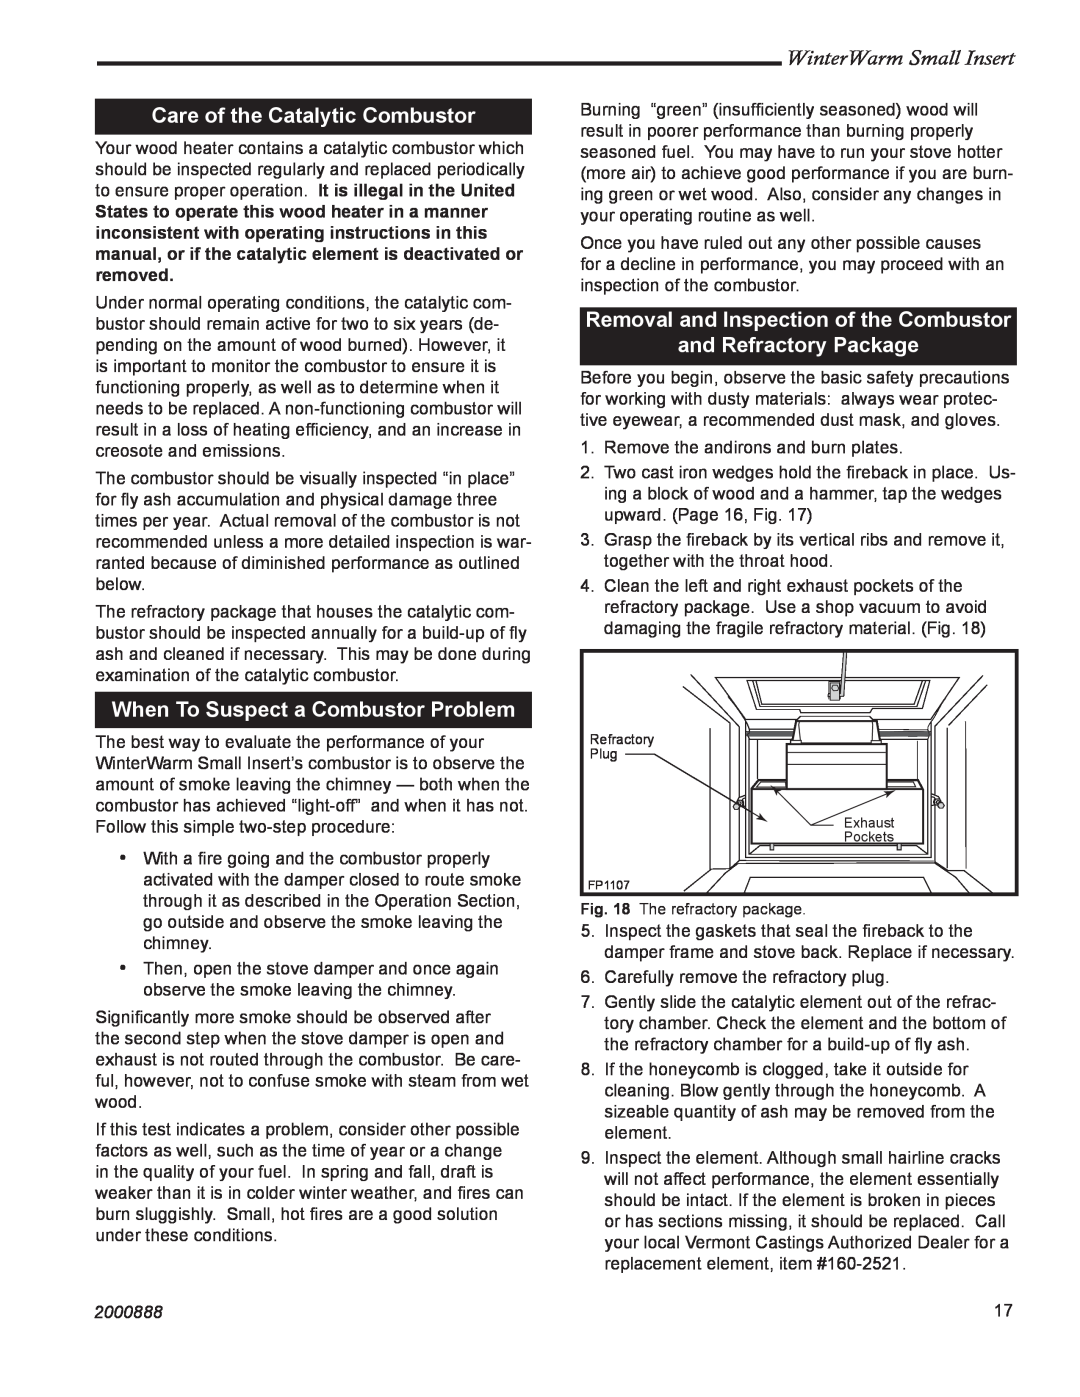 CFM Corporation Winter Warm - Small Insert Care of the Catalytic Combustor, When To Suspect a Combustor Problem, 2000888 